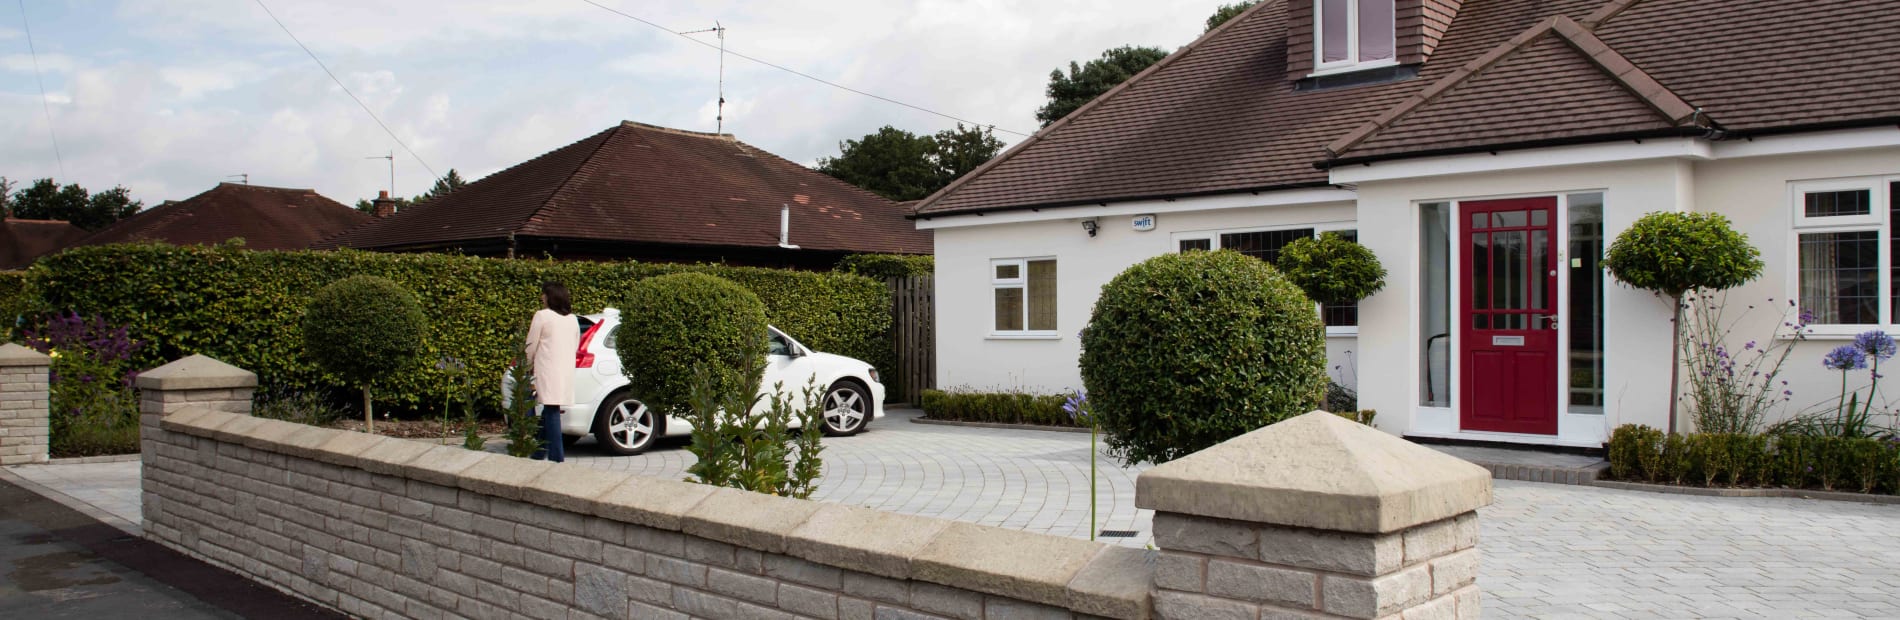 marshalls drivesett tegula laid in front of a house.